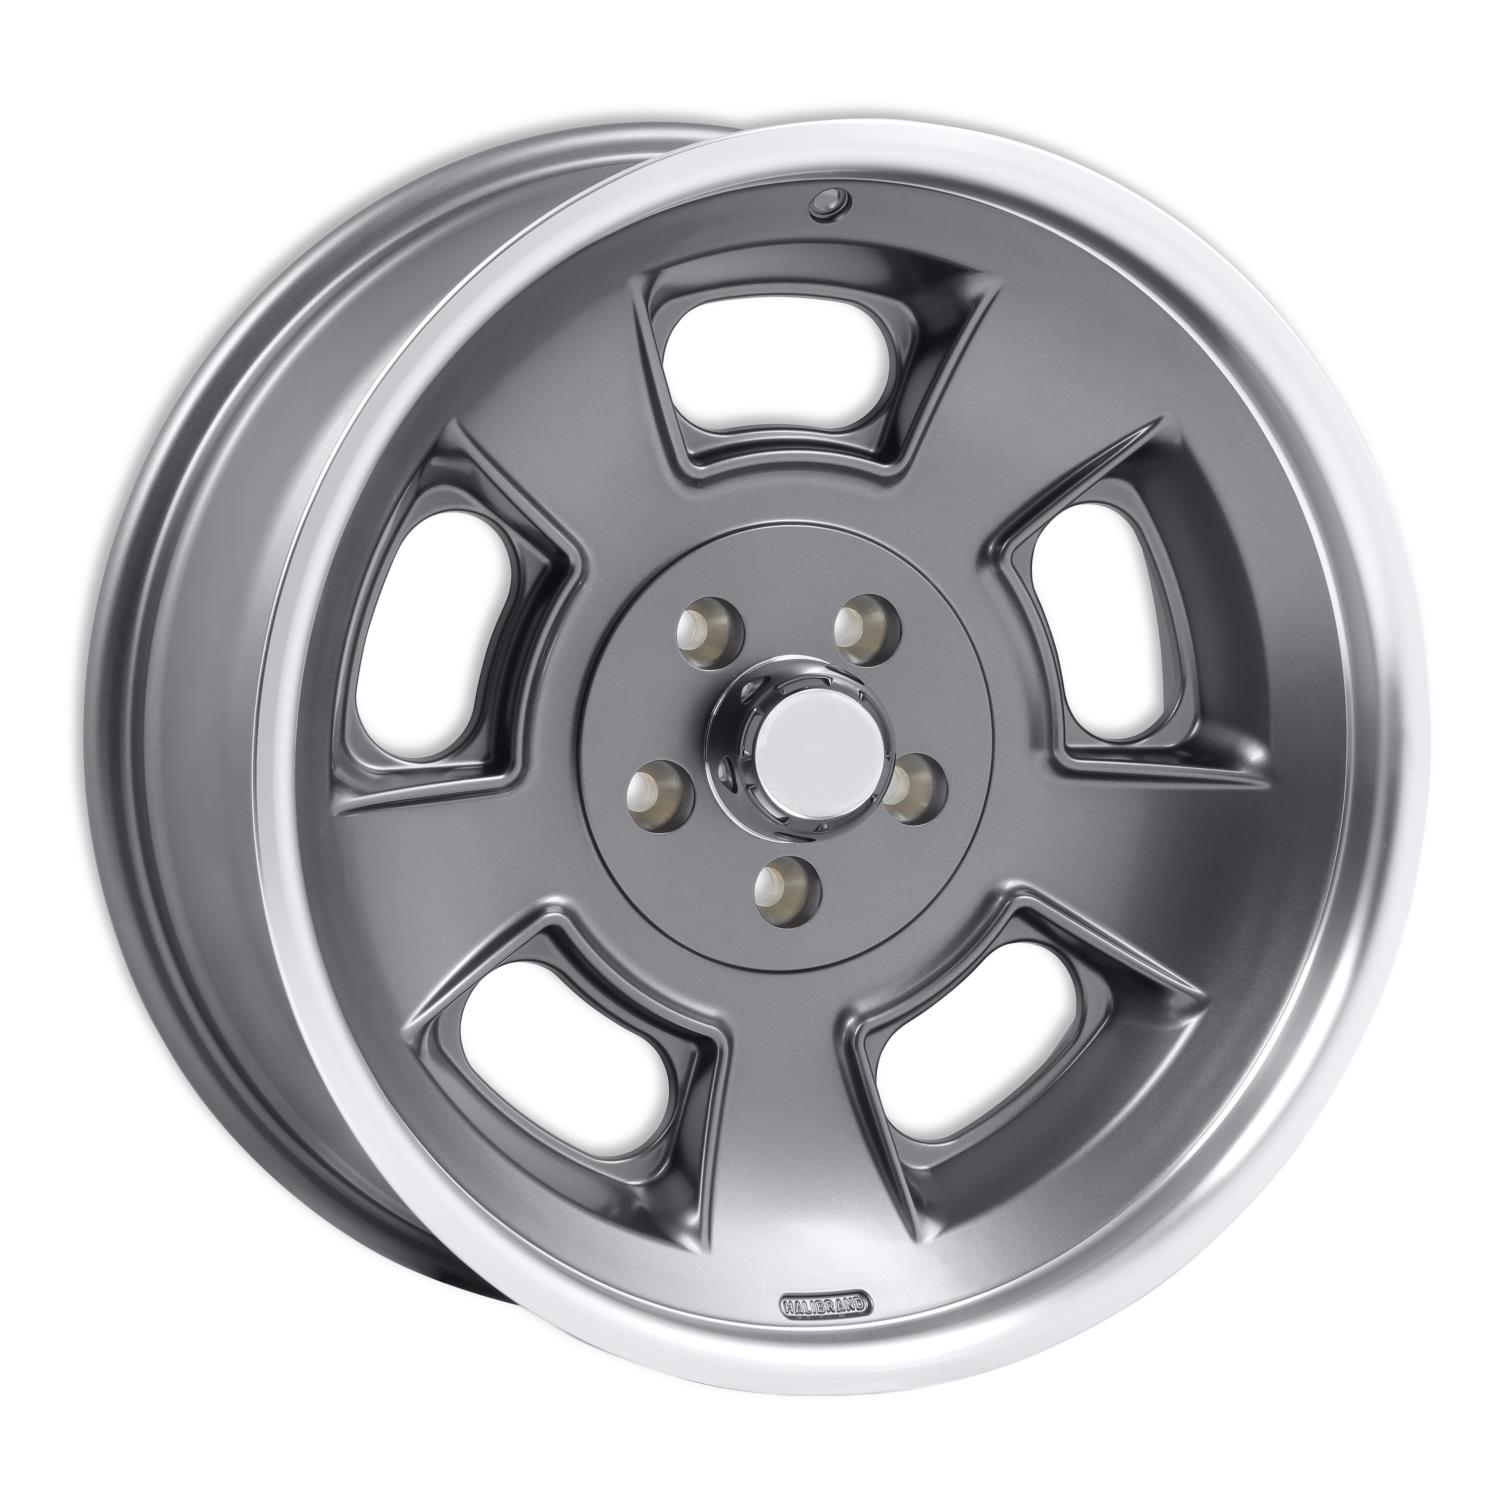 Sprint Front Wheel, Size: 20x8.5", Bolt Pattern: 5x5", Backspace: 4.5" [Anthracite with Machined Lip - Semi Gloss Clearcoat]